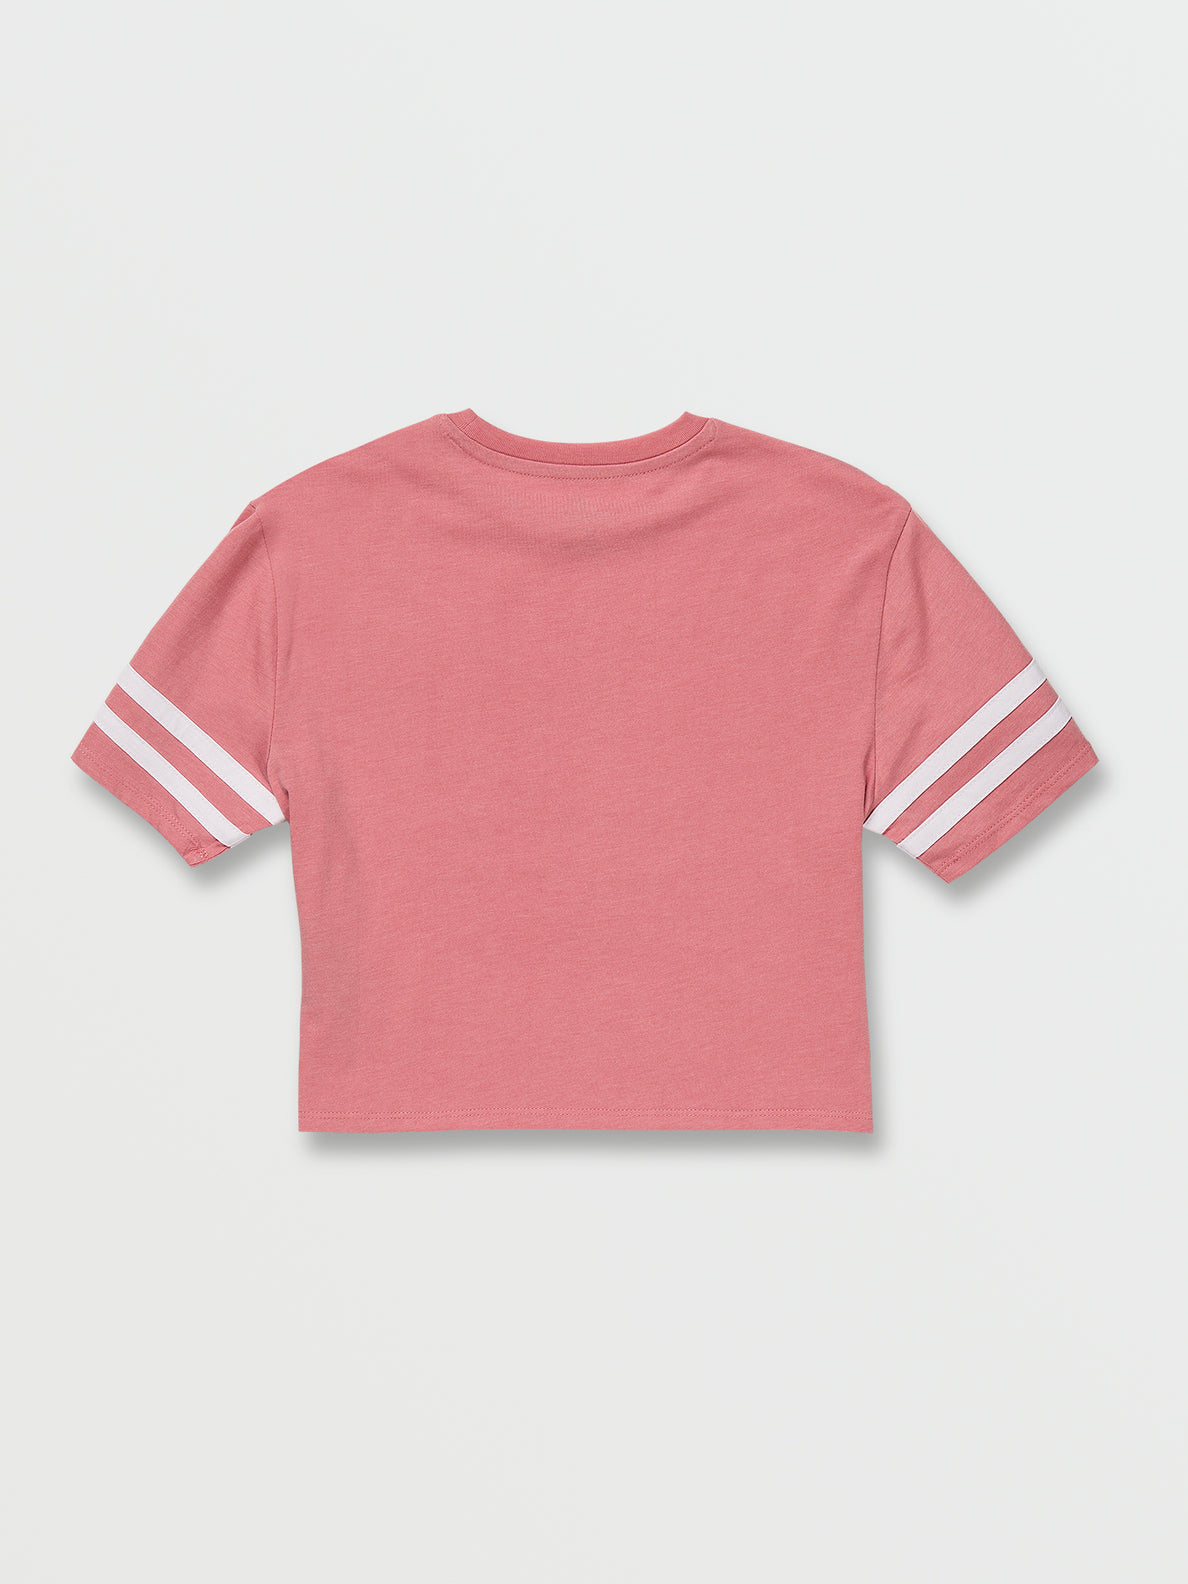 Girls Truly Stoked Tee - Desert Pink (R3512303_DSP) [B]